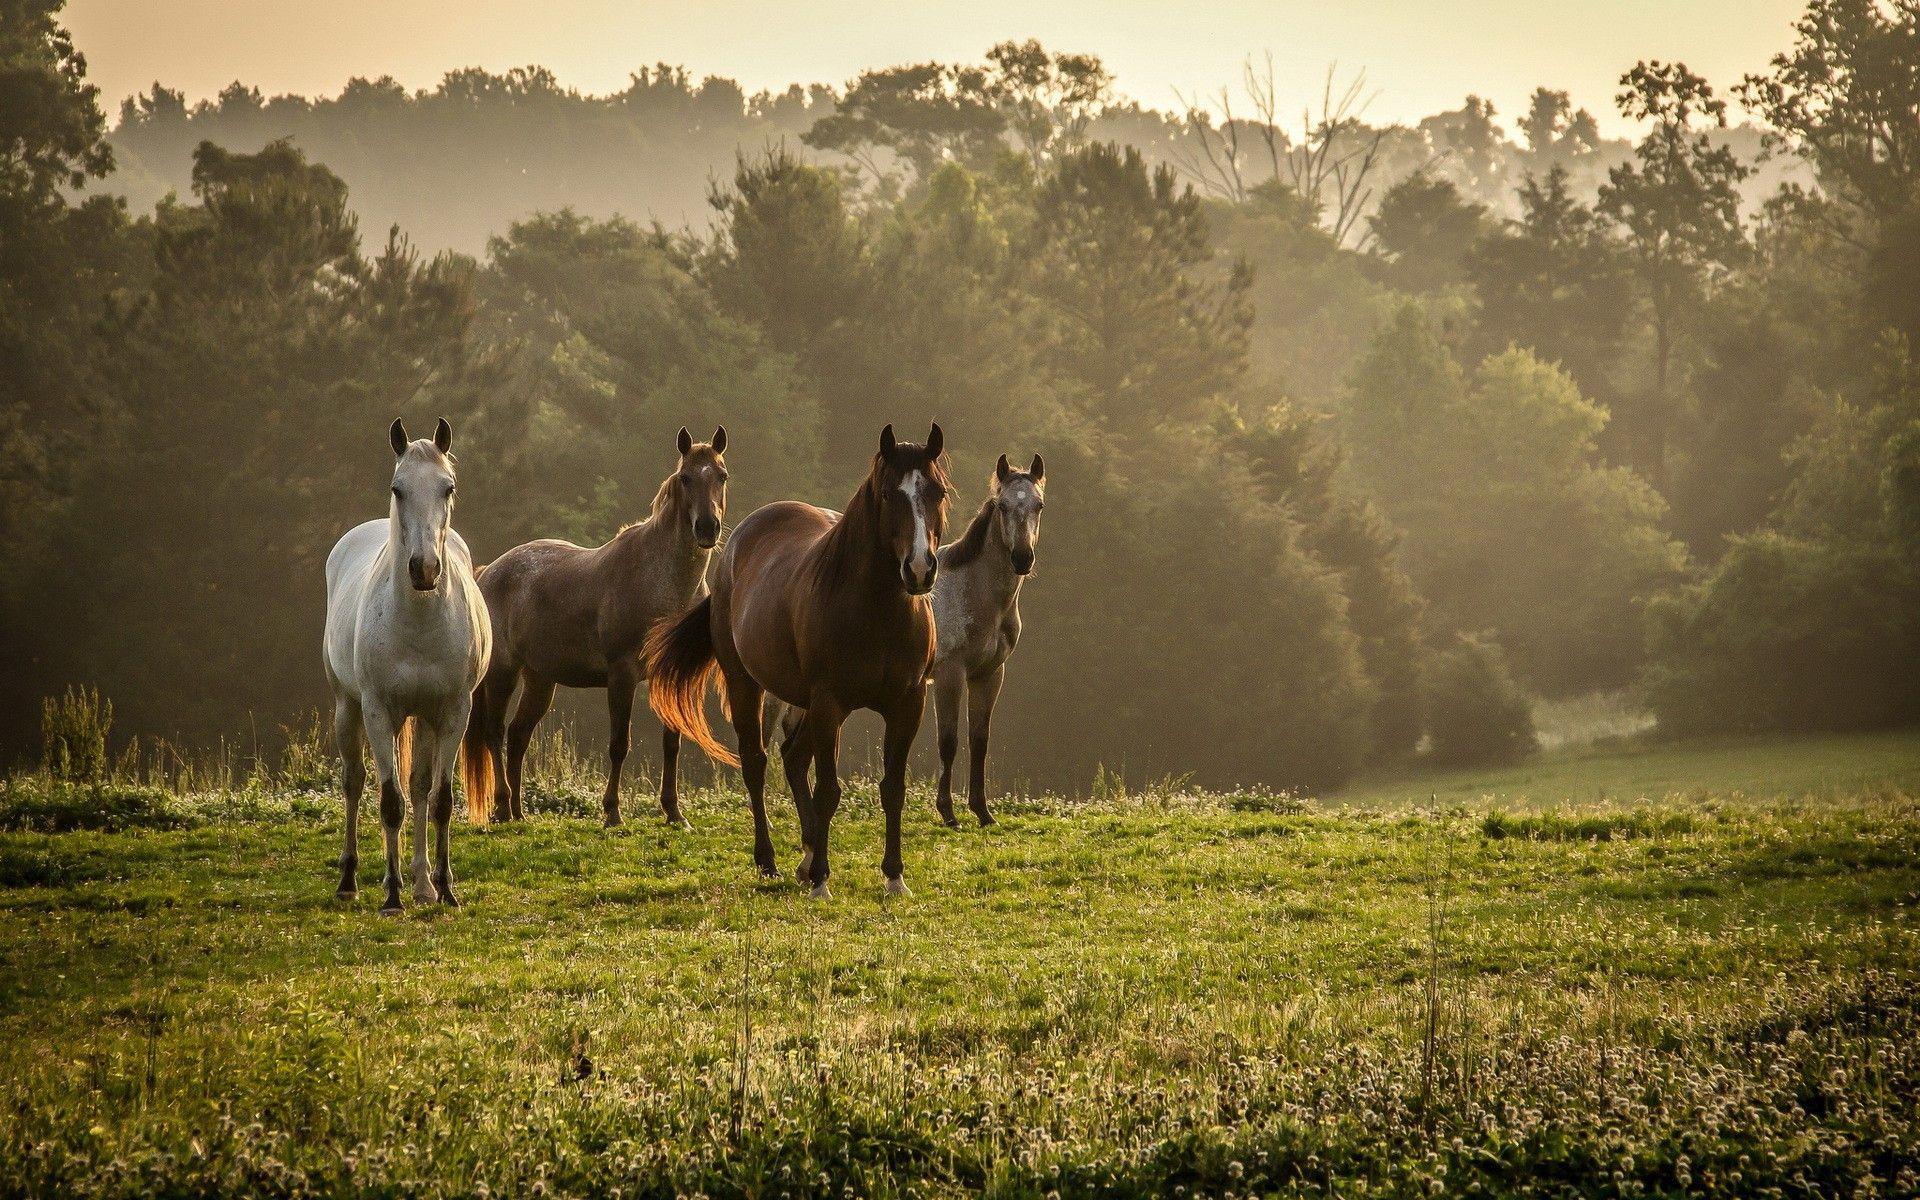 Daily Wallpaper: Horses in the Wilderness. I Like To Waste My Time